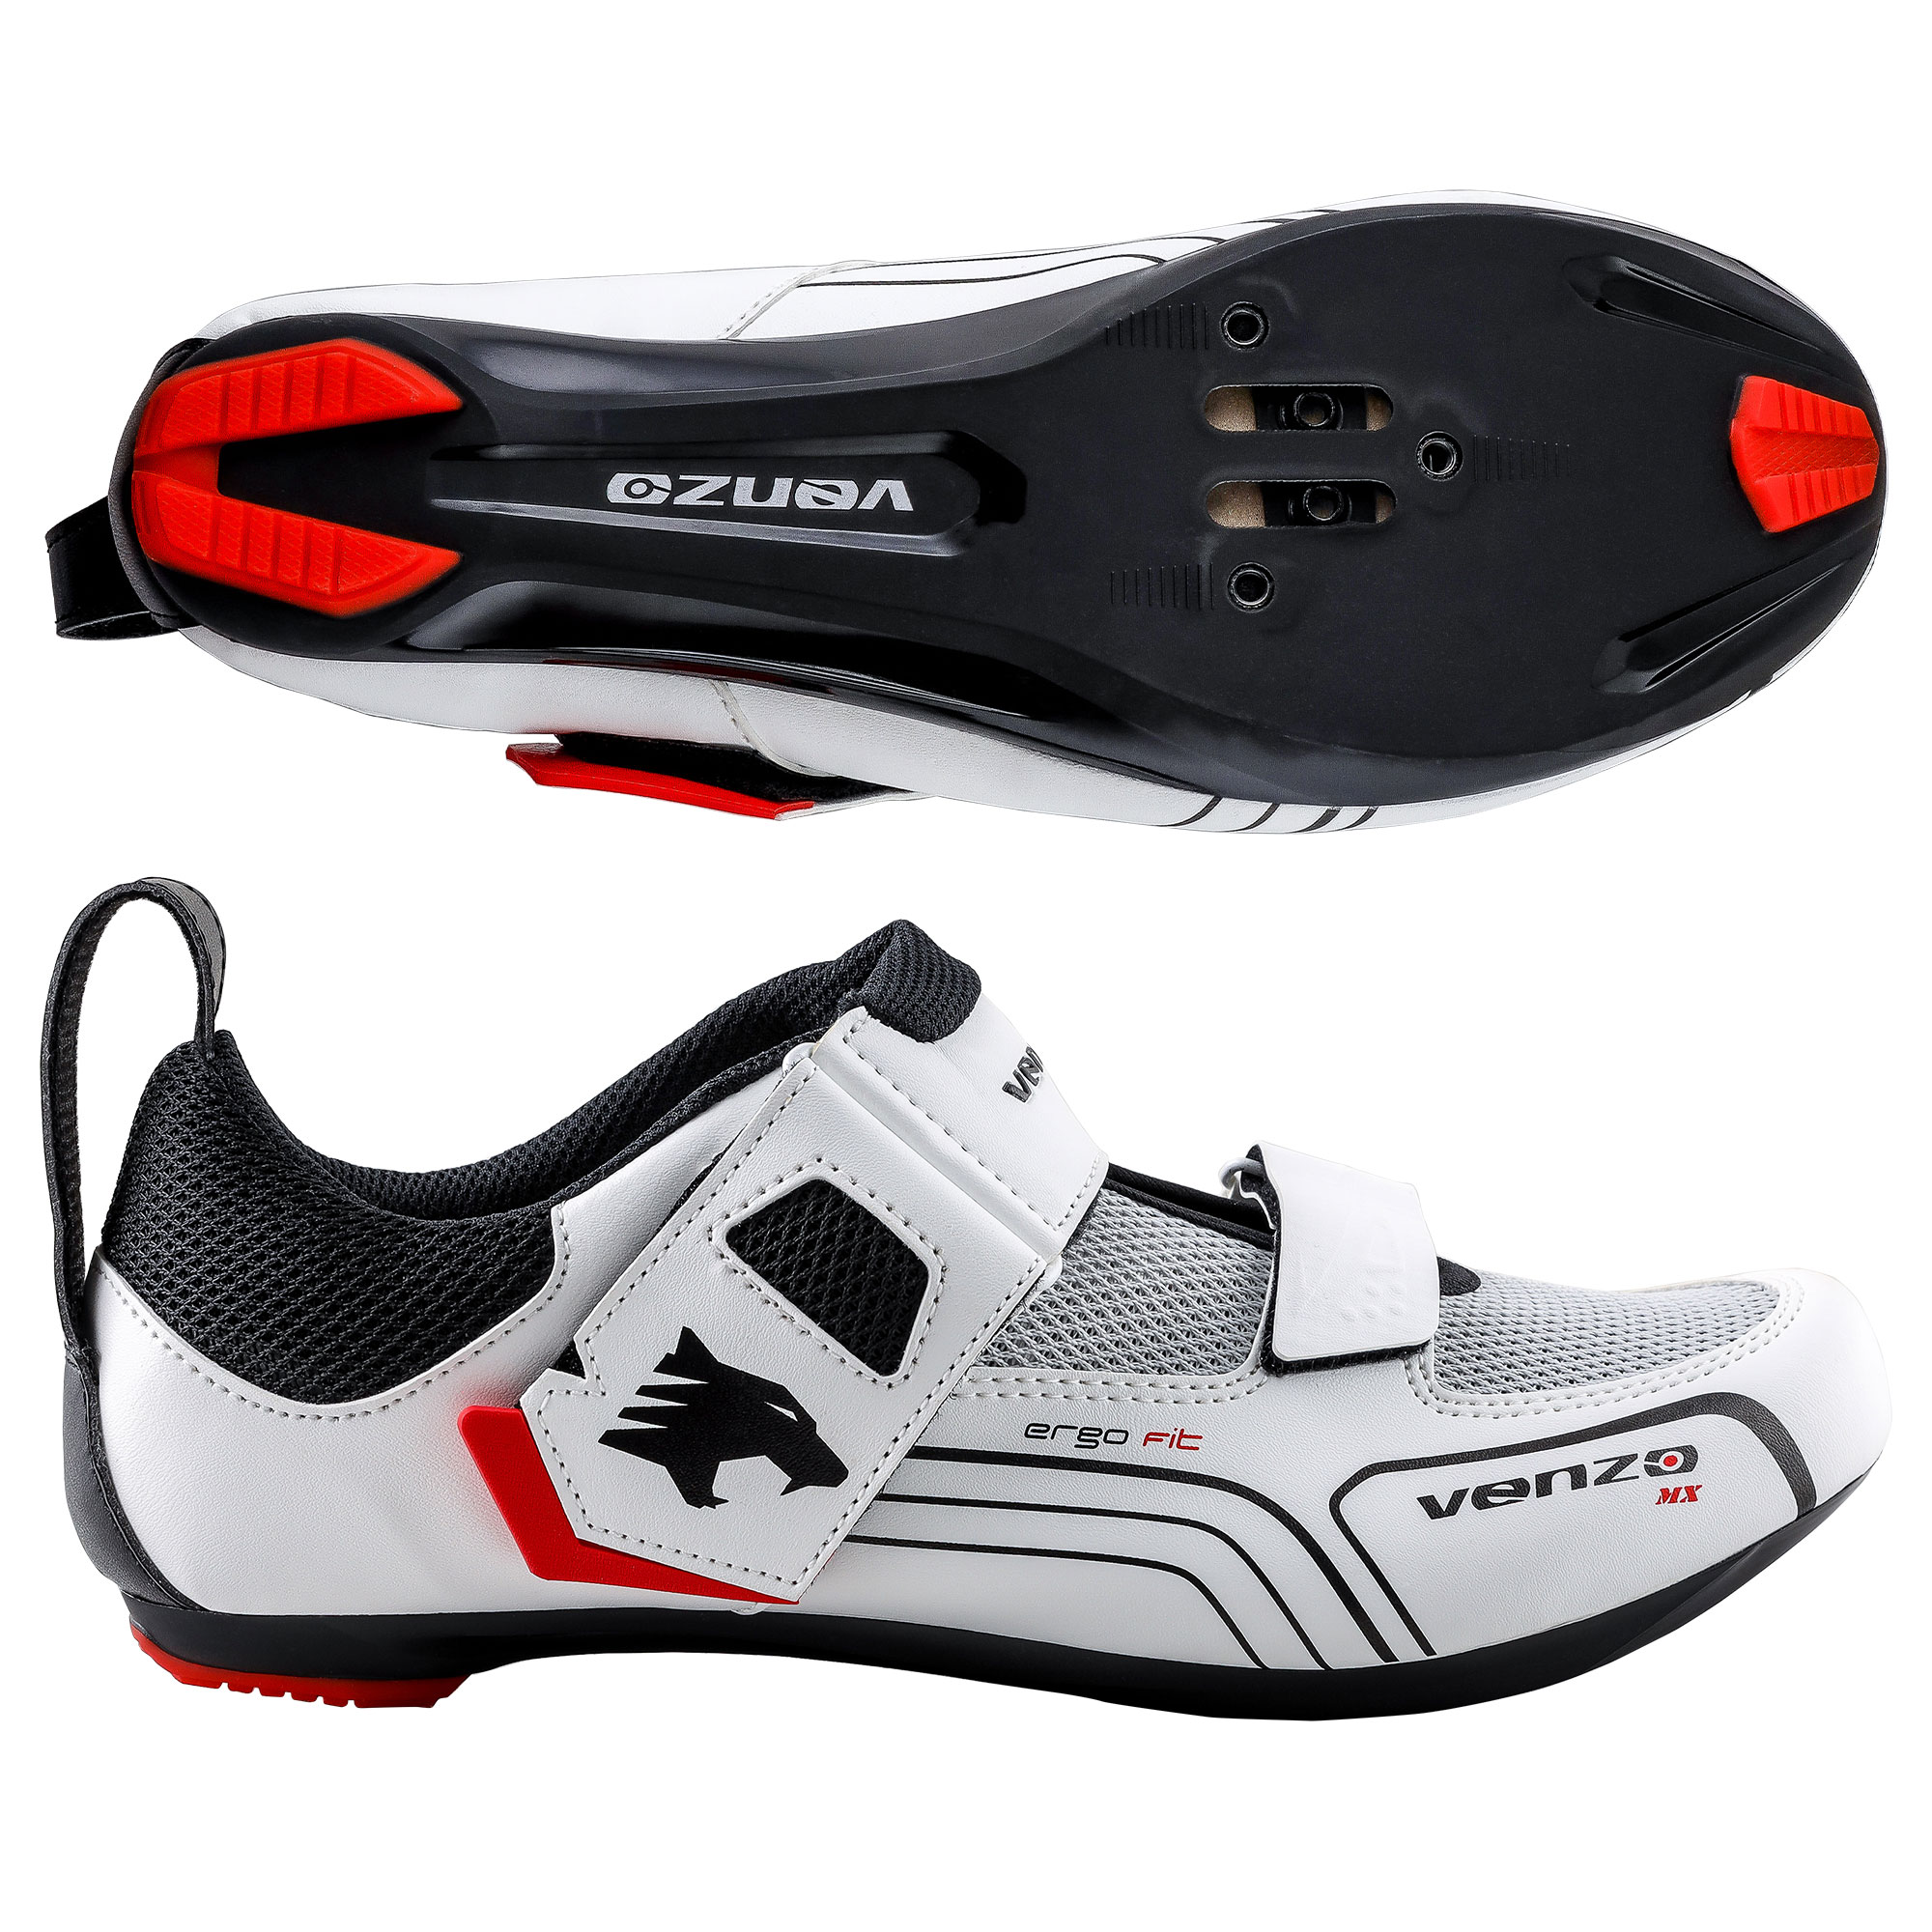 Venzo Cycling Bicycle Triathlon Road Bike Shoes For Shimano SPD SL Look White 